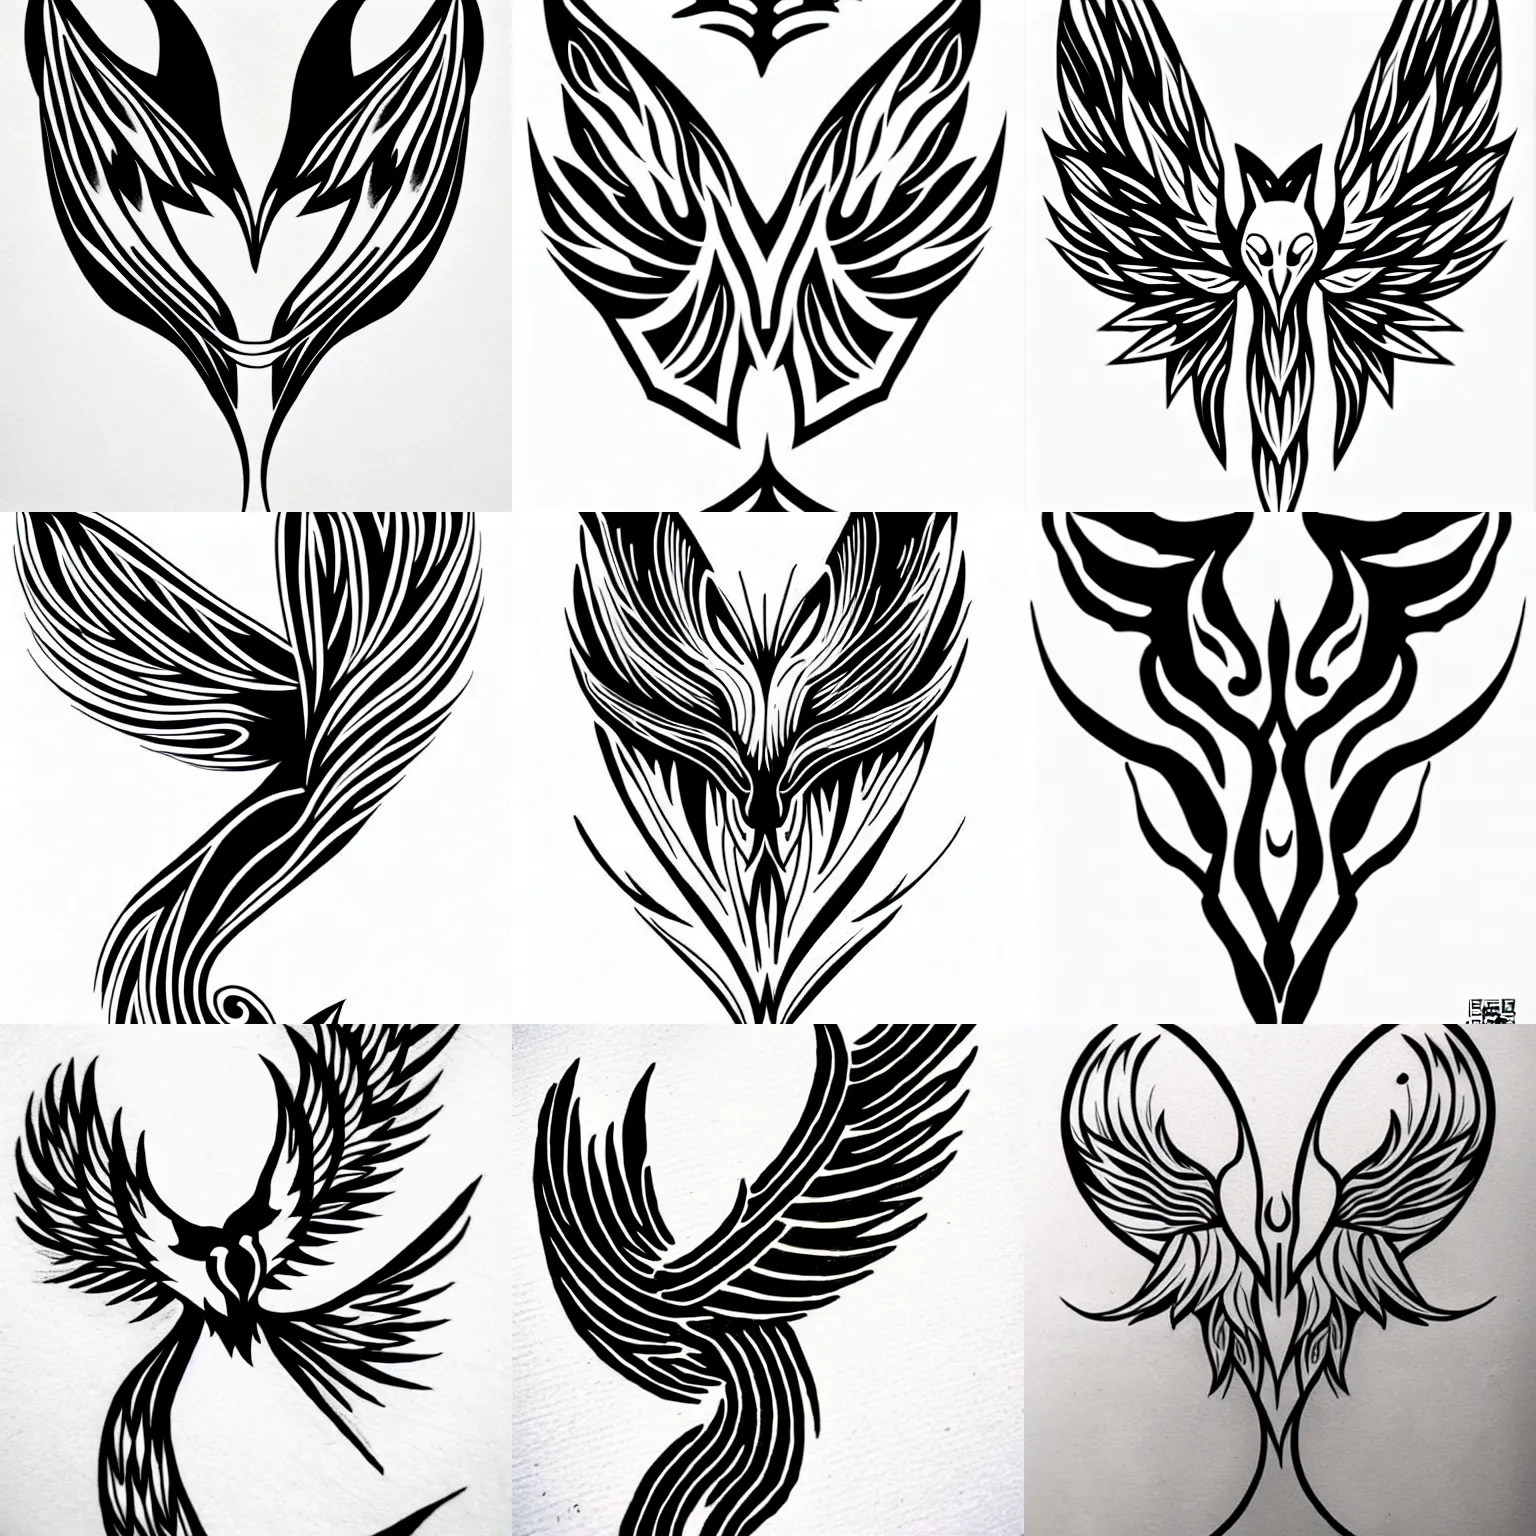 KREA - tattoo design, Winged-thorny-heart fractal, simple design on white  background, clean black pen drawing